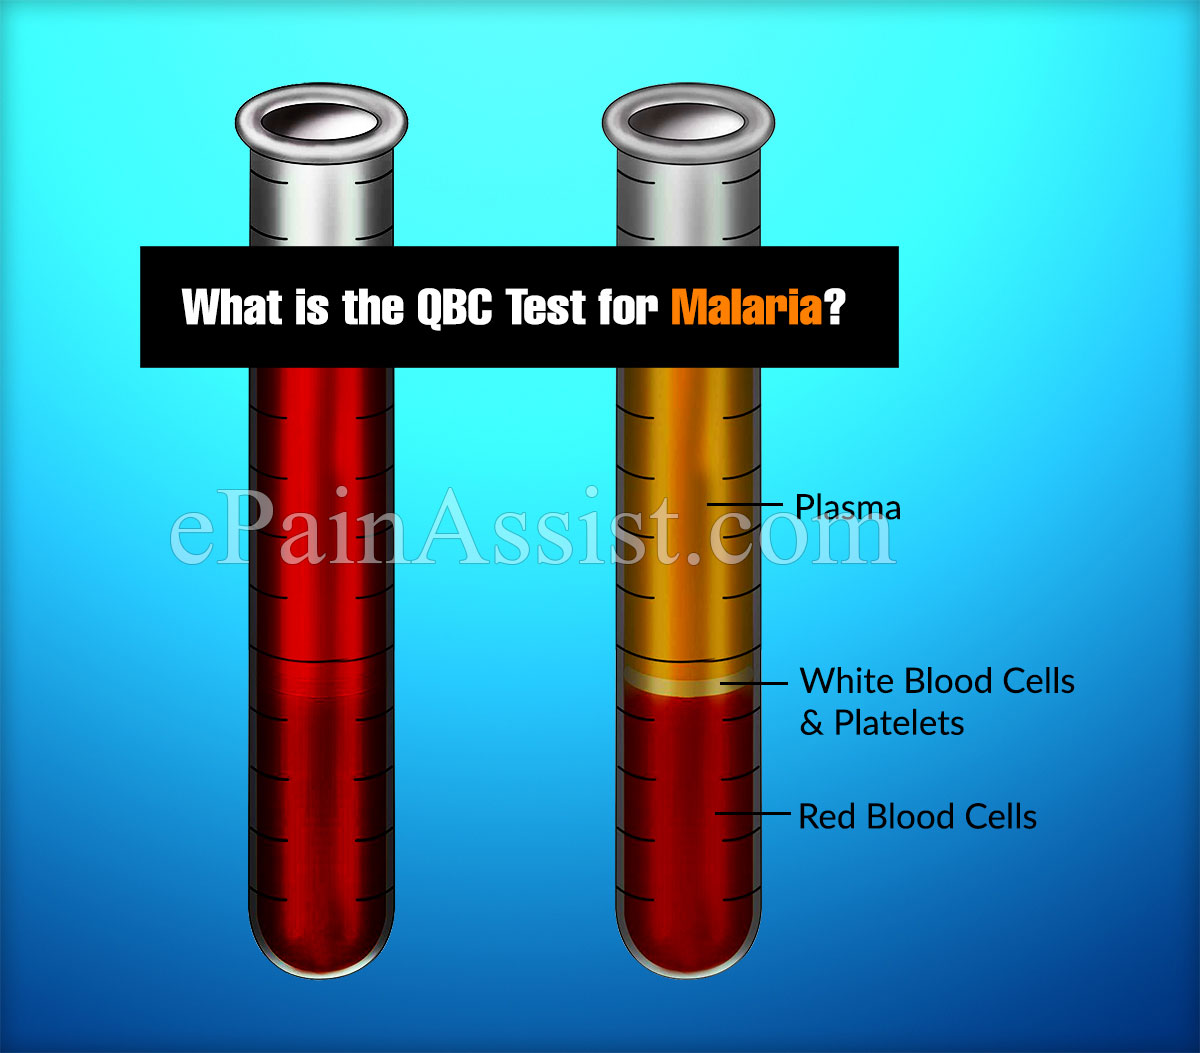 What is the QBC Test for Malaria?